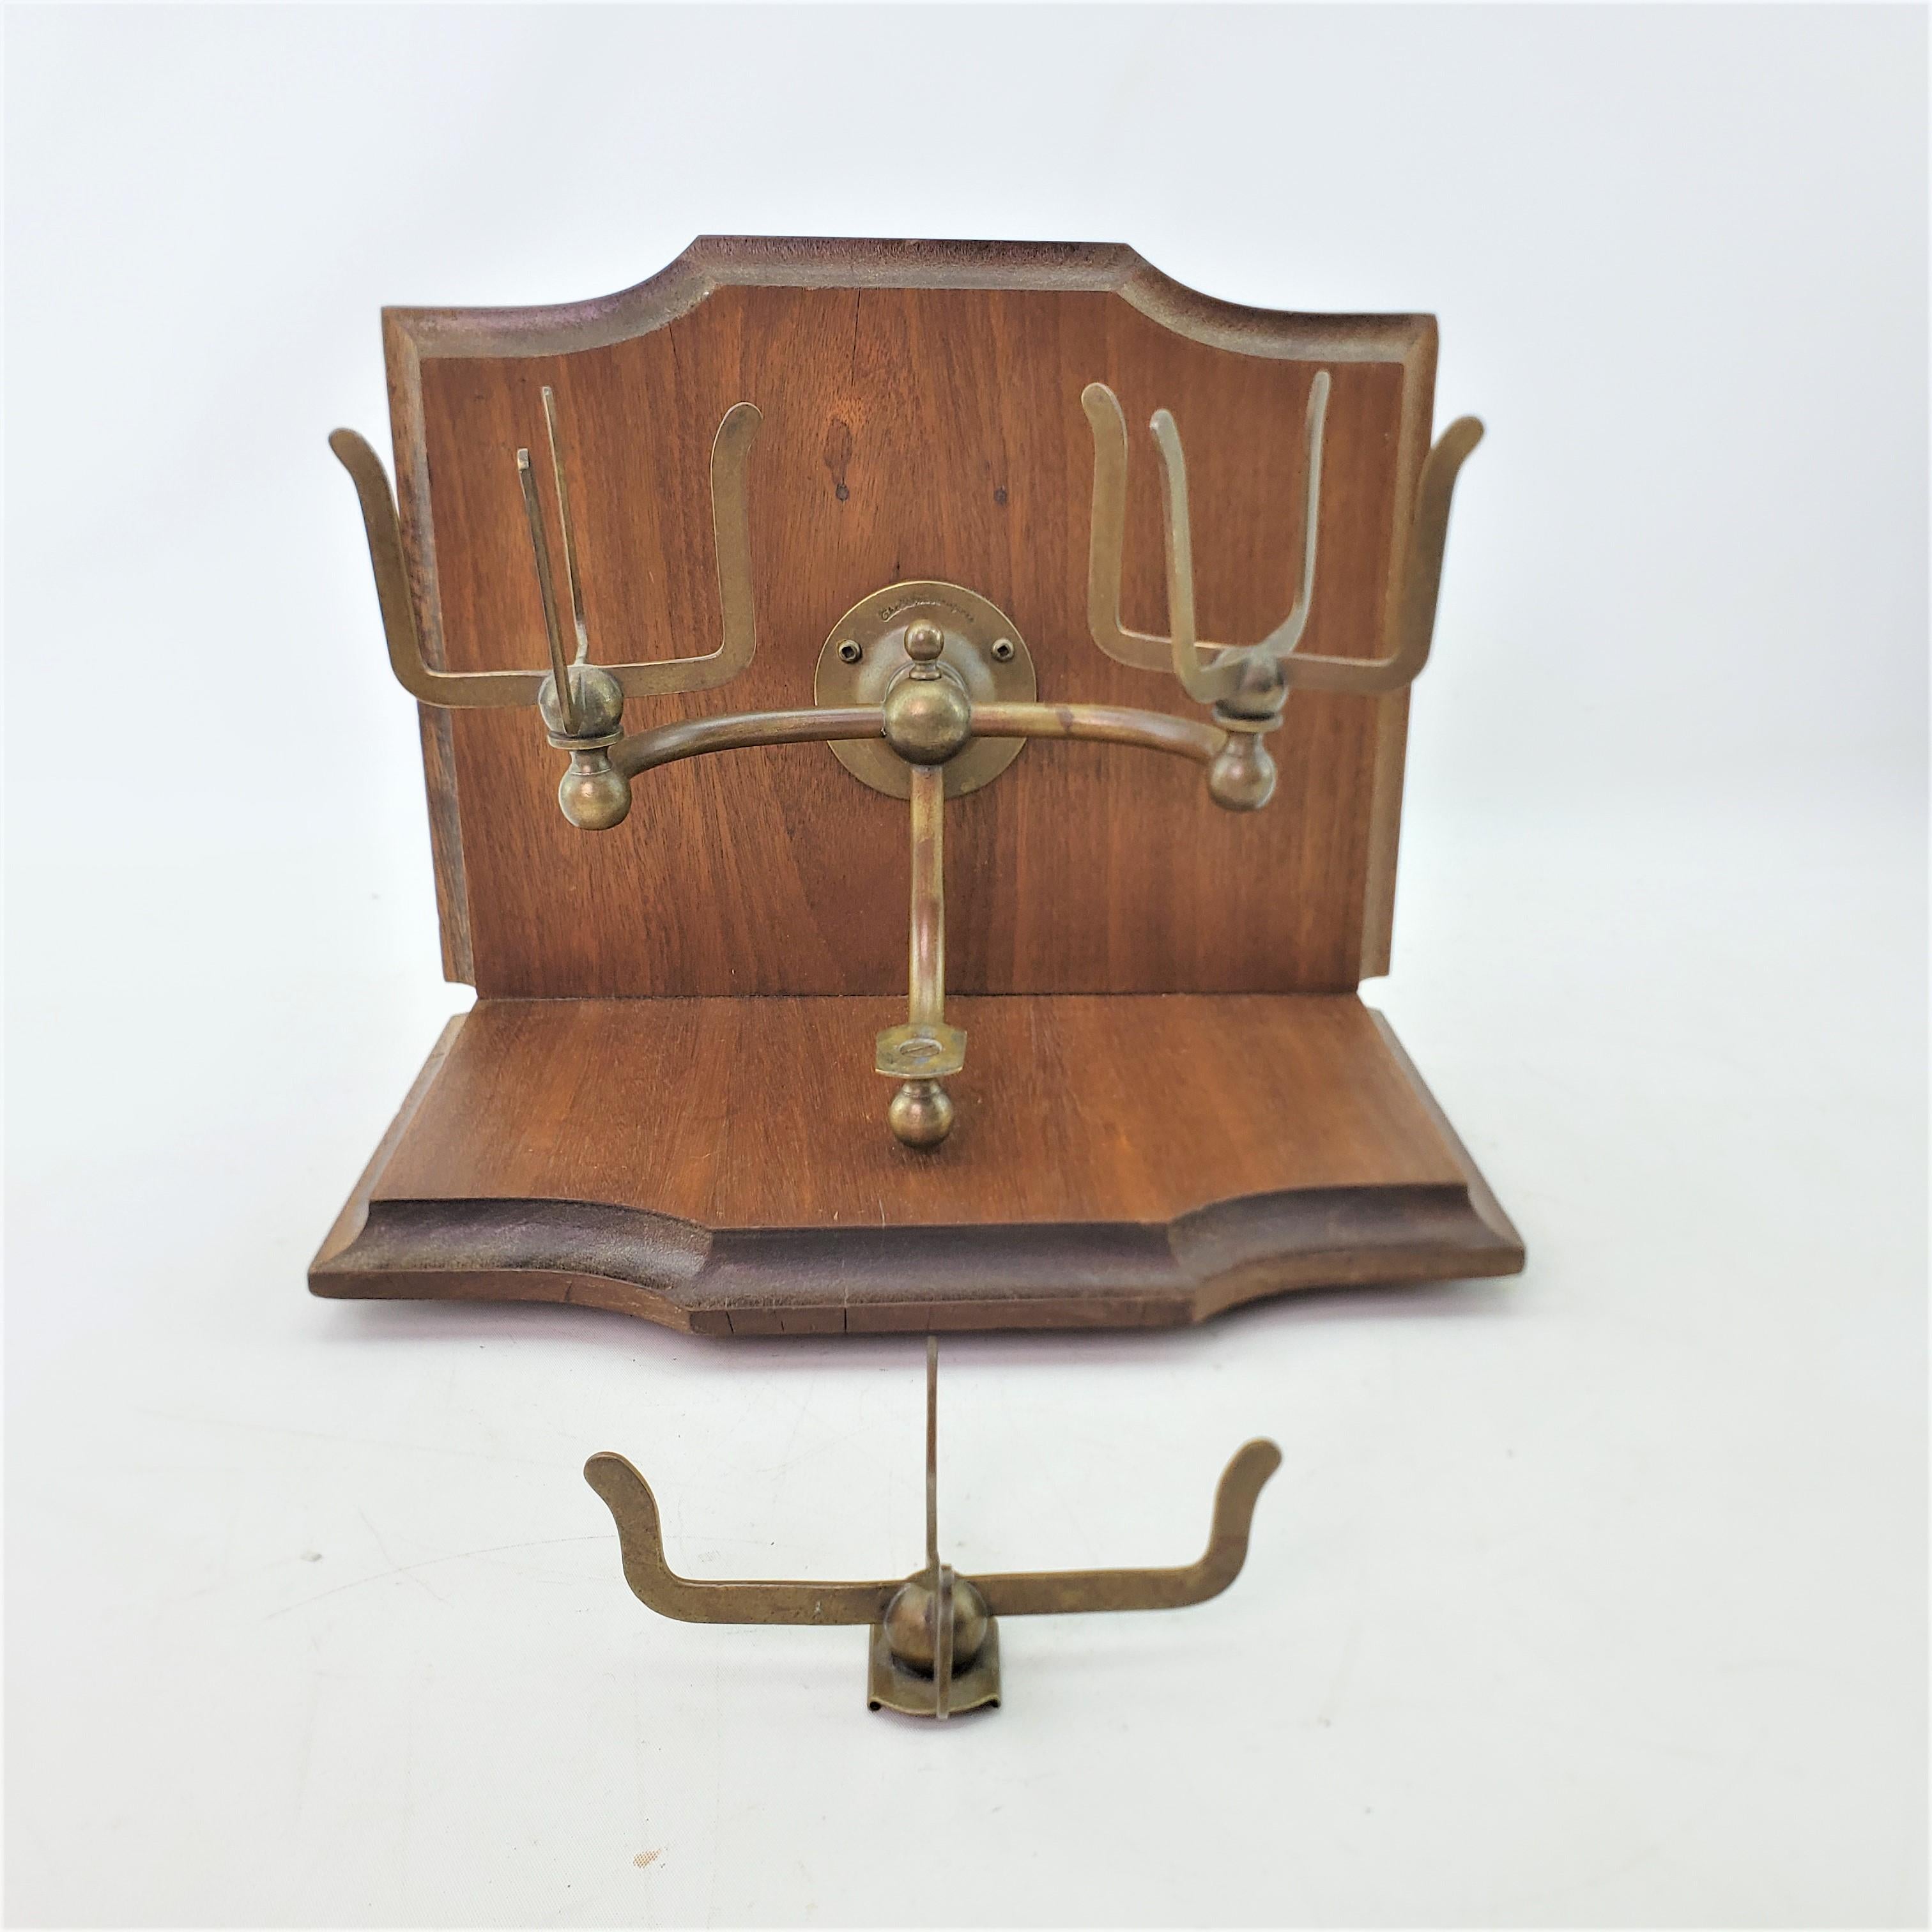 20th Century Antique Wall Mount Brass Bathroom Prong Dual Cup Holder & Soap Dish Holder For Sale